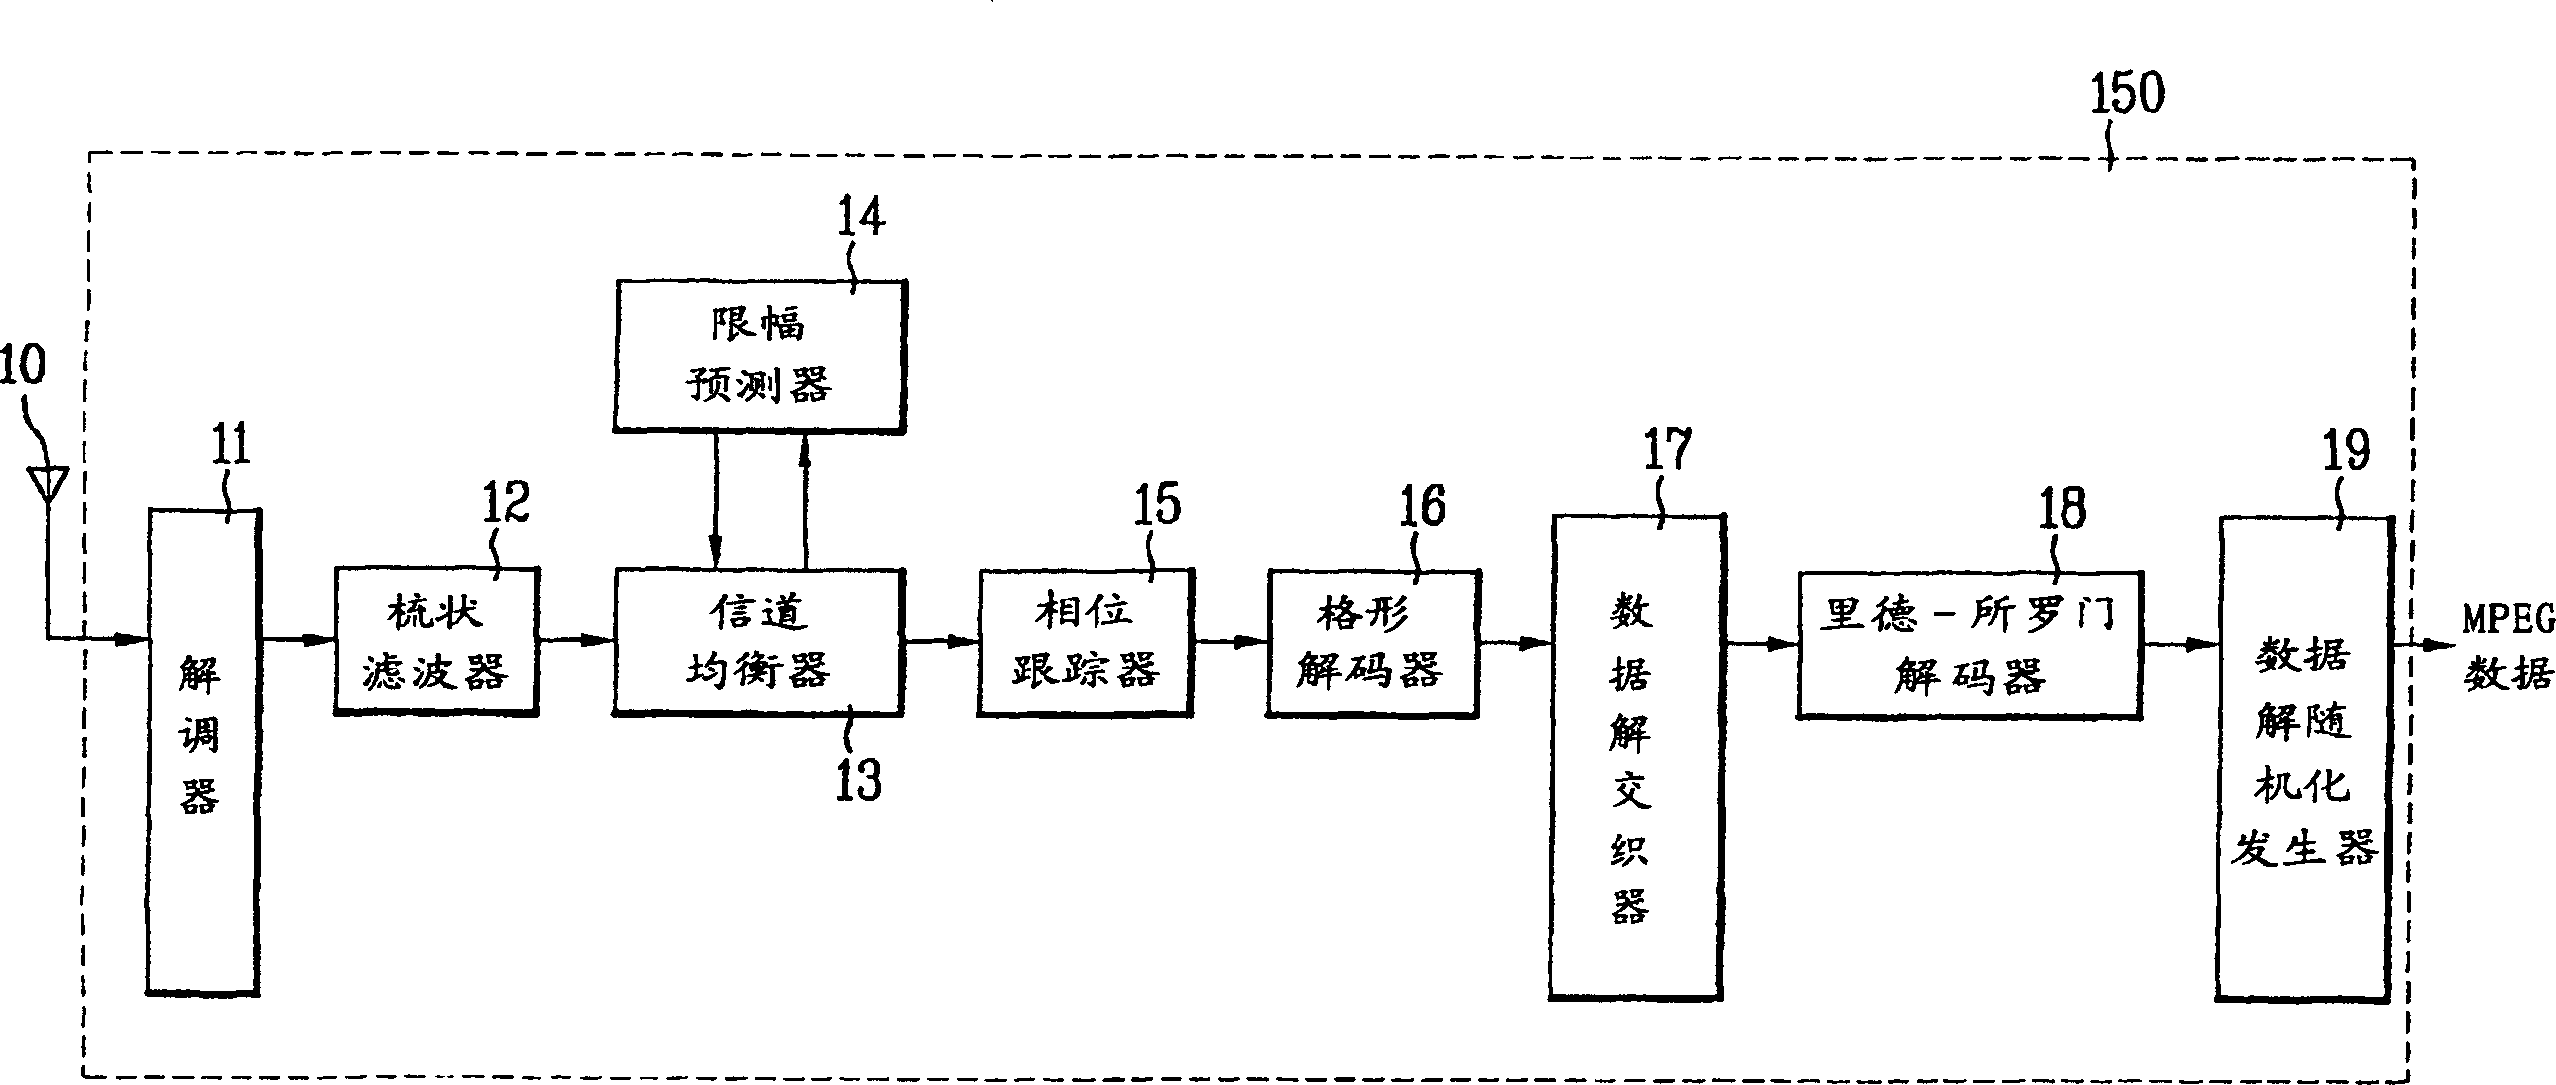 VSB reception system with enhanced signal detection for processing supplemental data